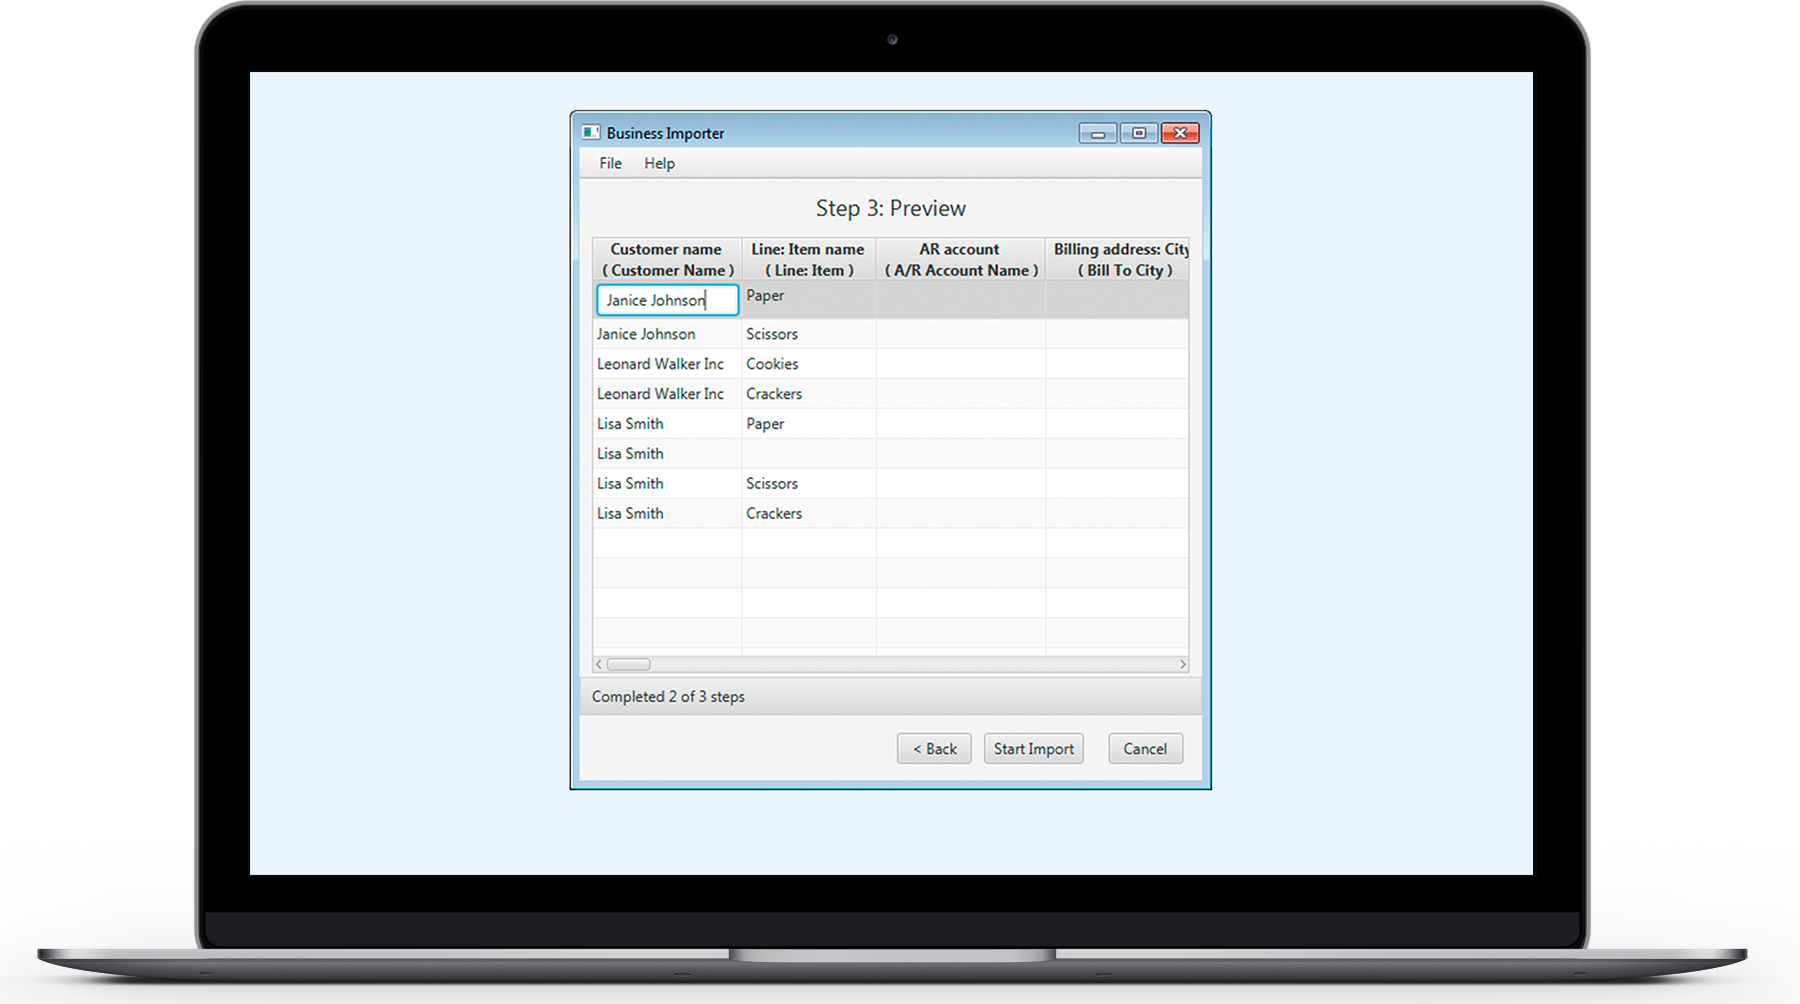 Step 3: Preview your mapping before importing data into QuickBooks